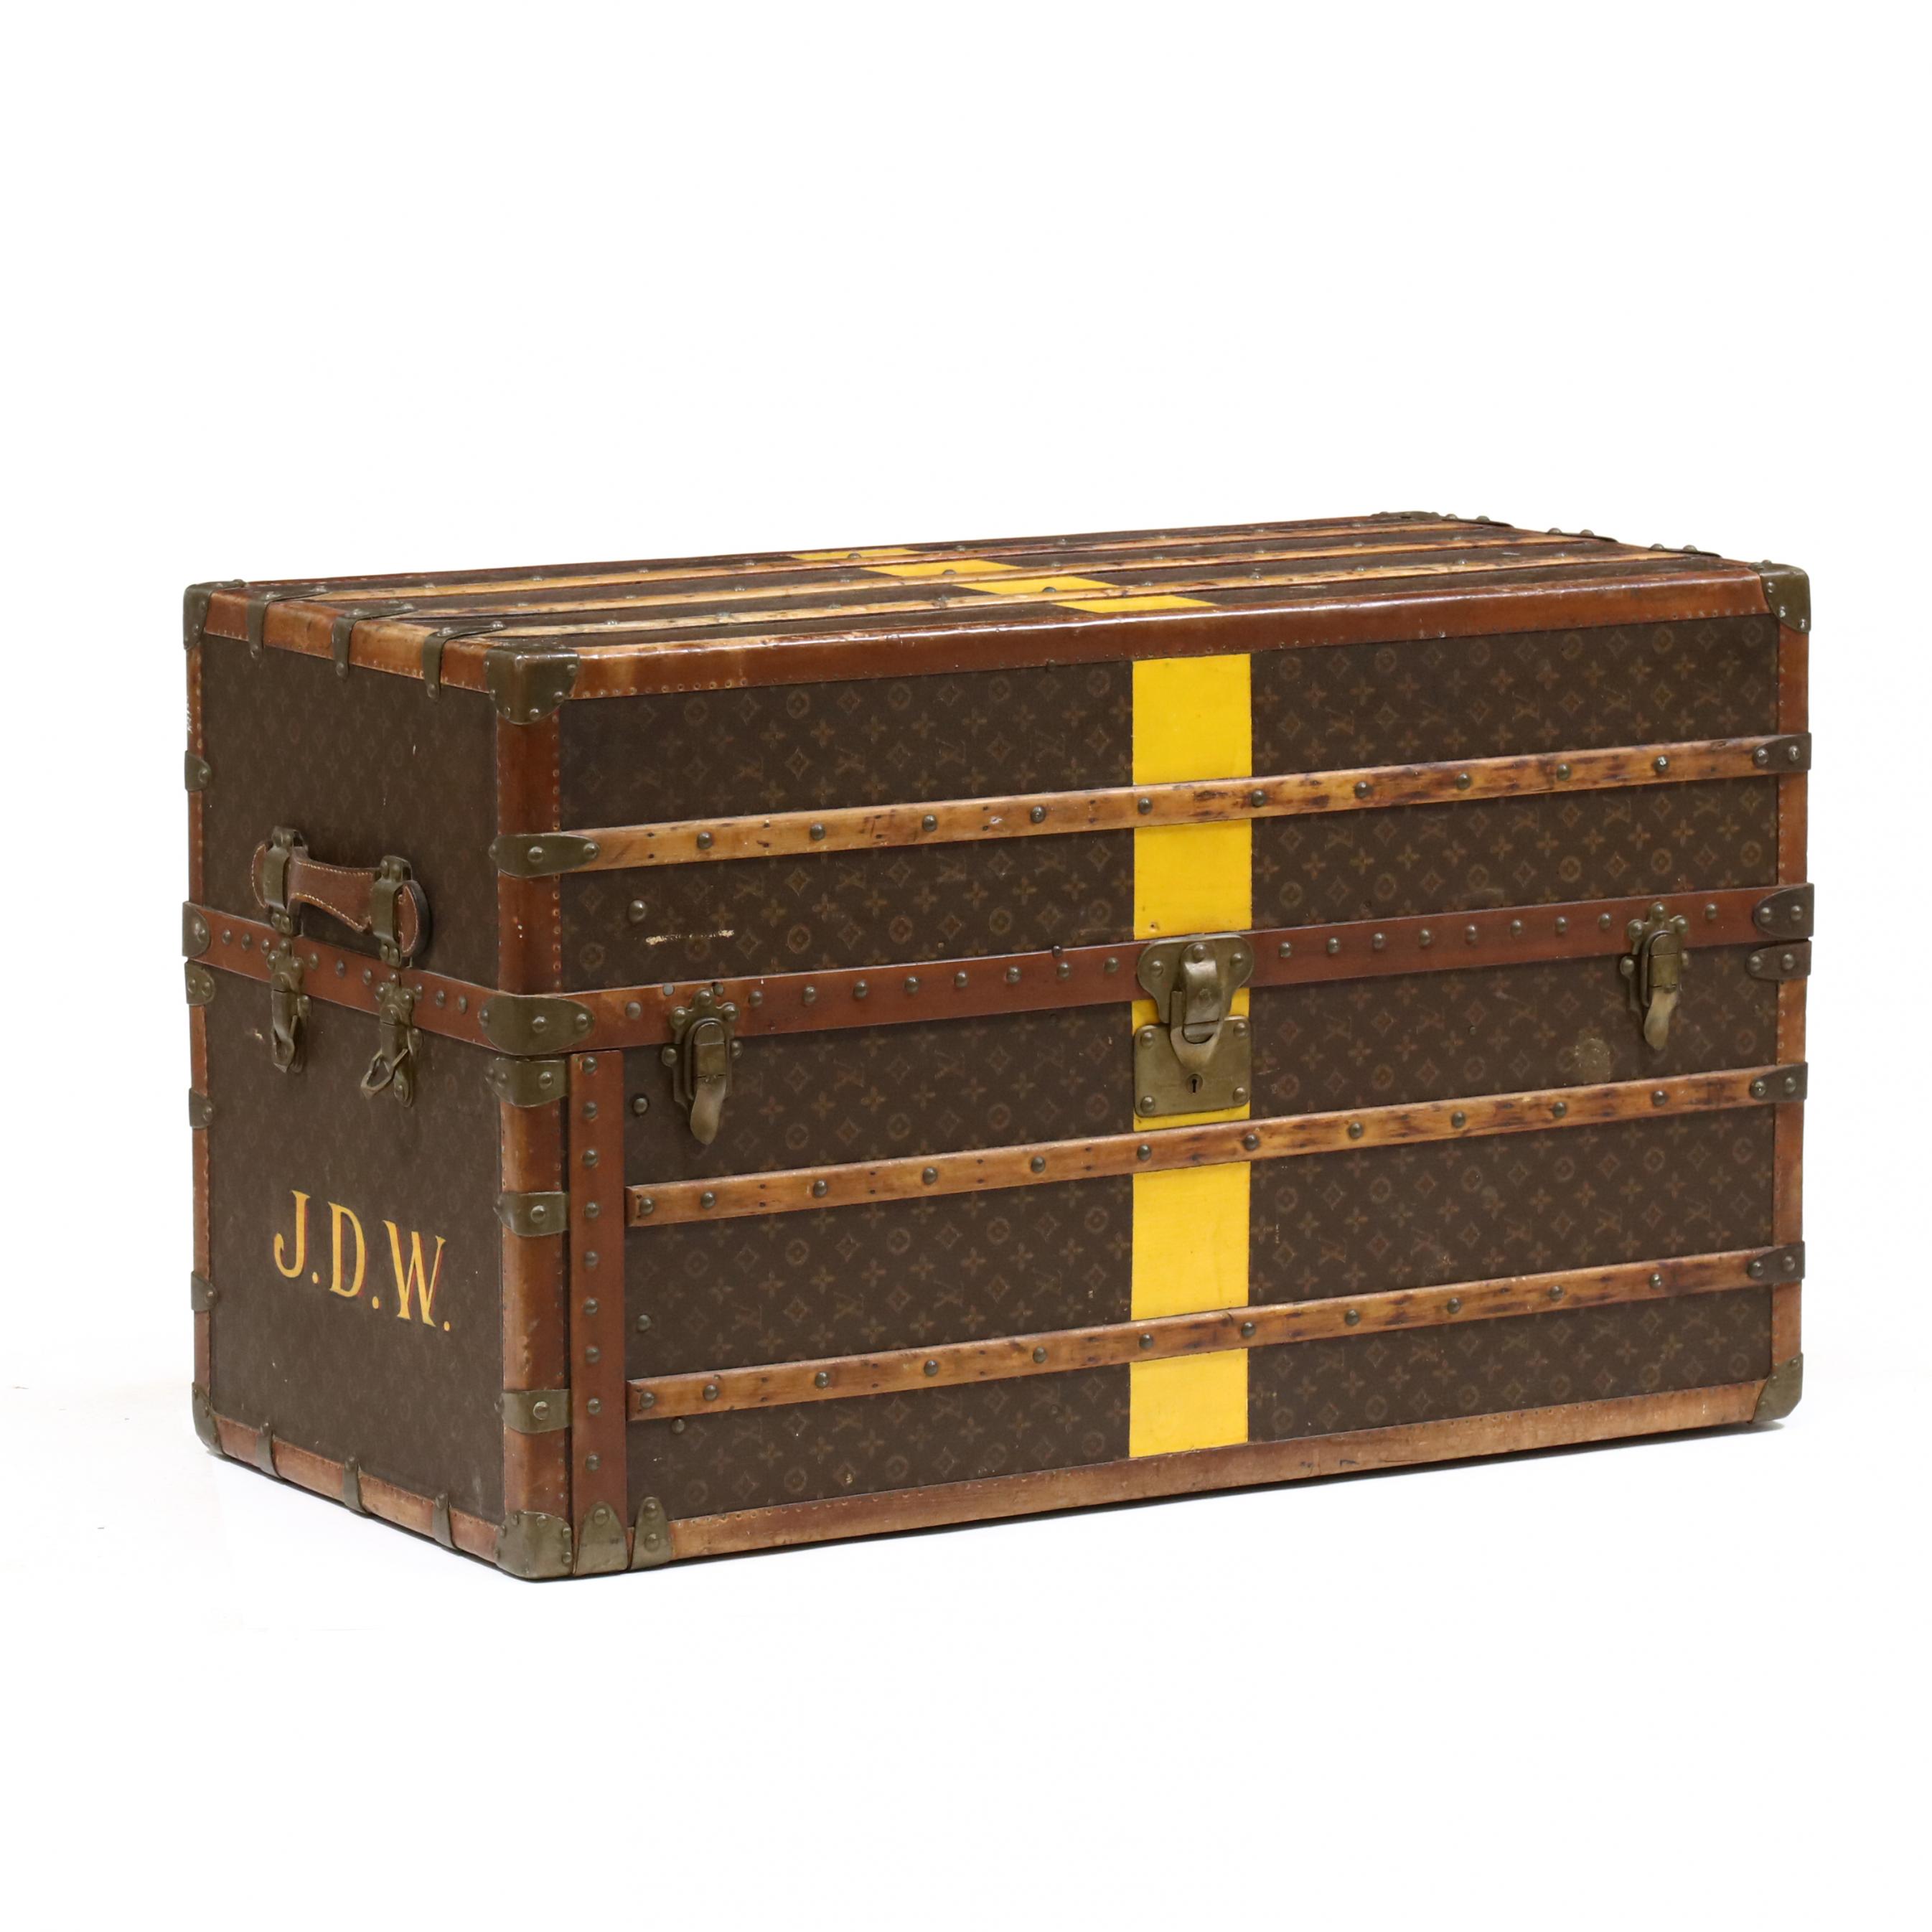 All Leather Wardrobe Steamer Trunk or Coffee Table from Louis Vuitton